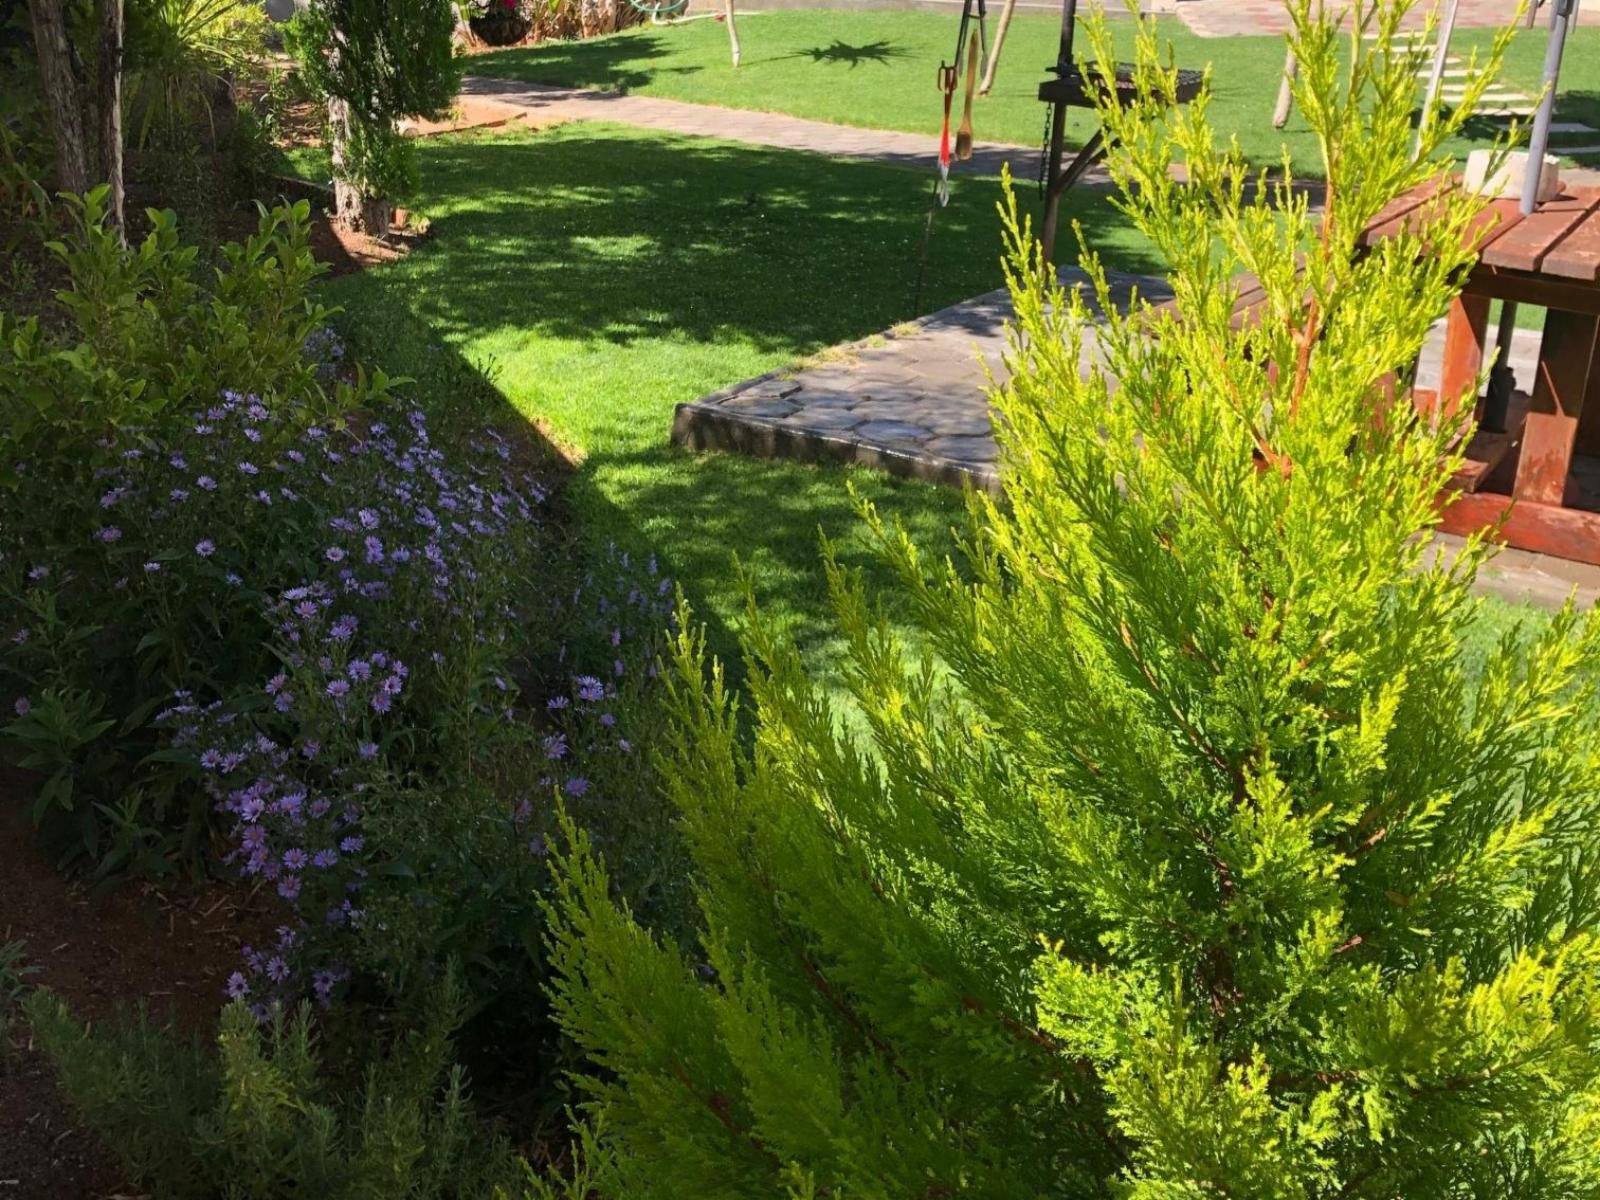 Kliprand Guesthouse Springbok Northern Cape South Africa Plant, Nature, Garden